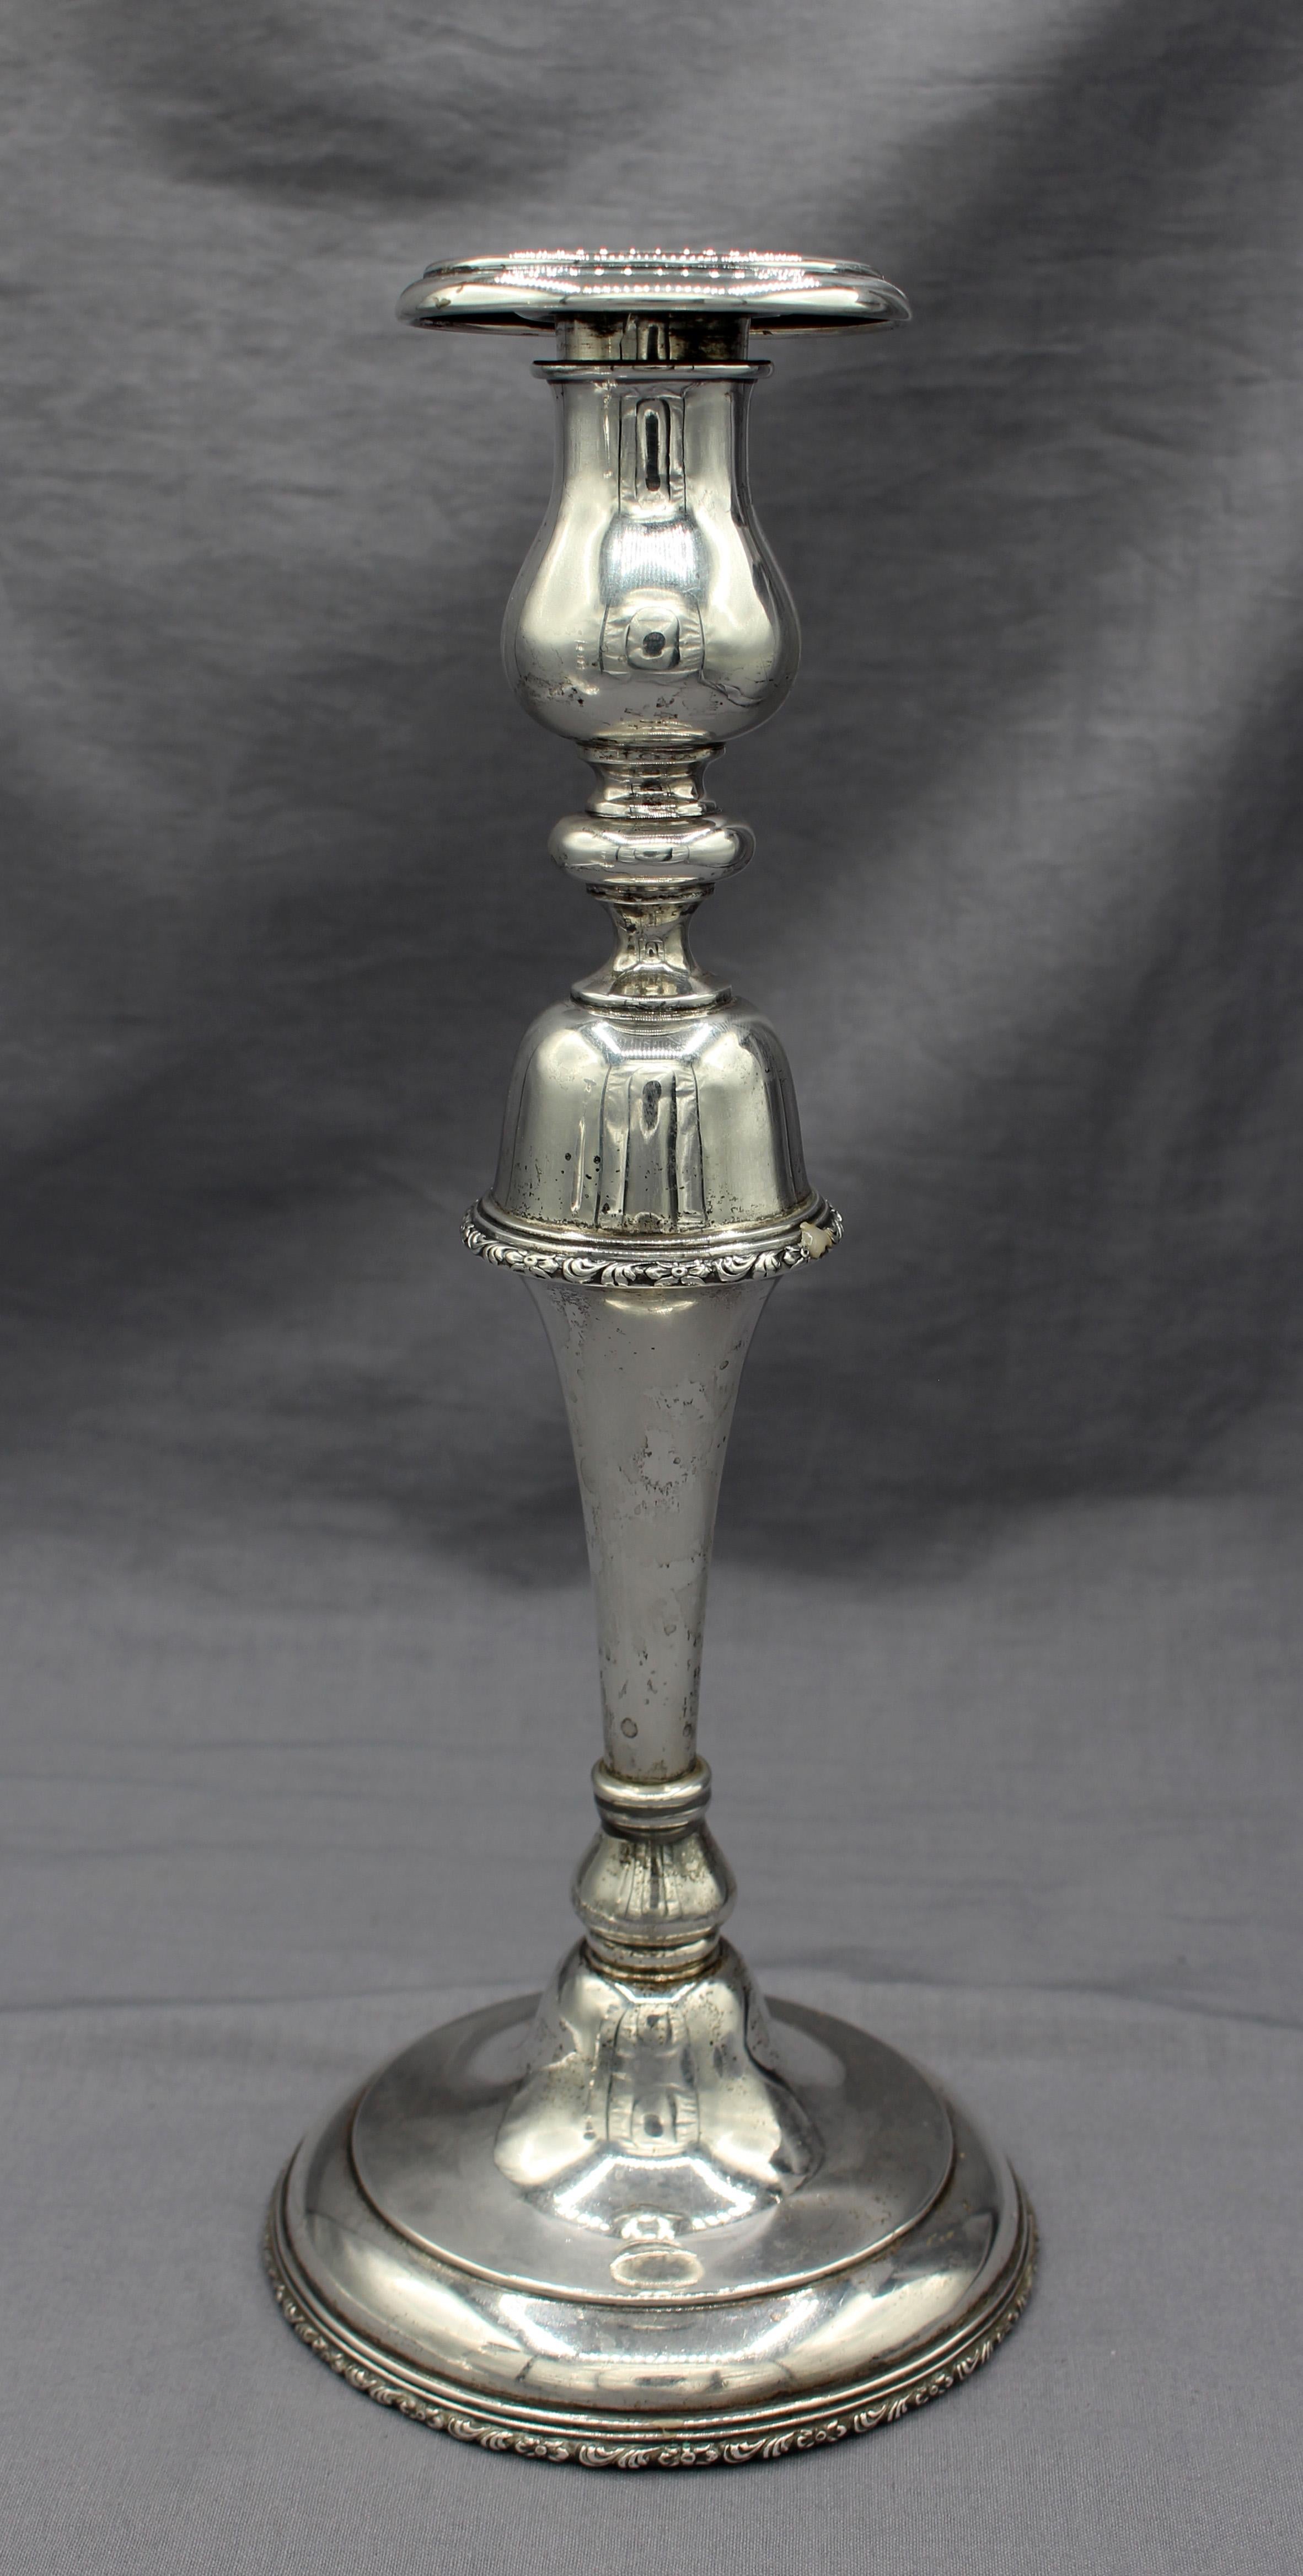 Pair of sterling silver candlesticks, American, circa 1920-30. With ingenious 